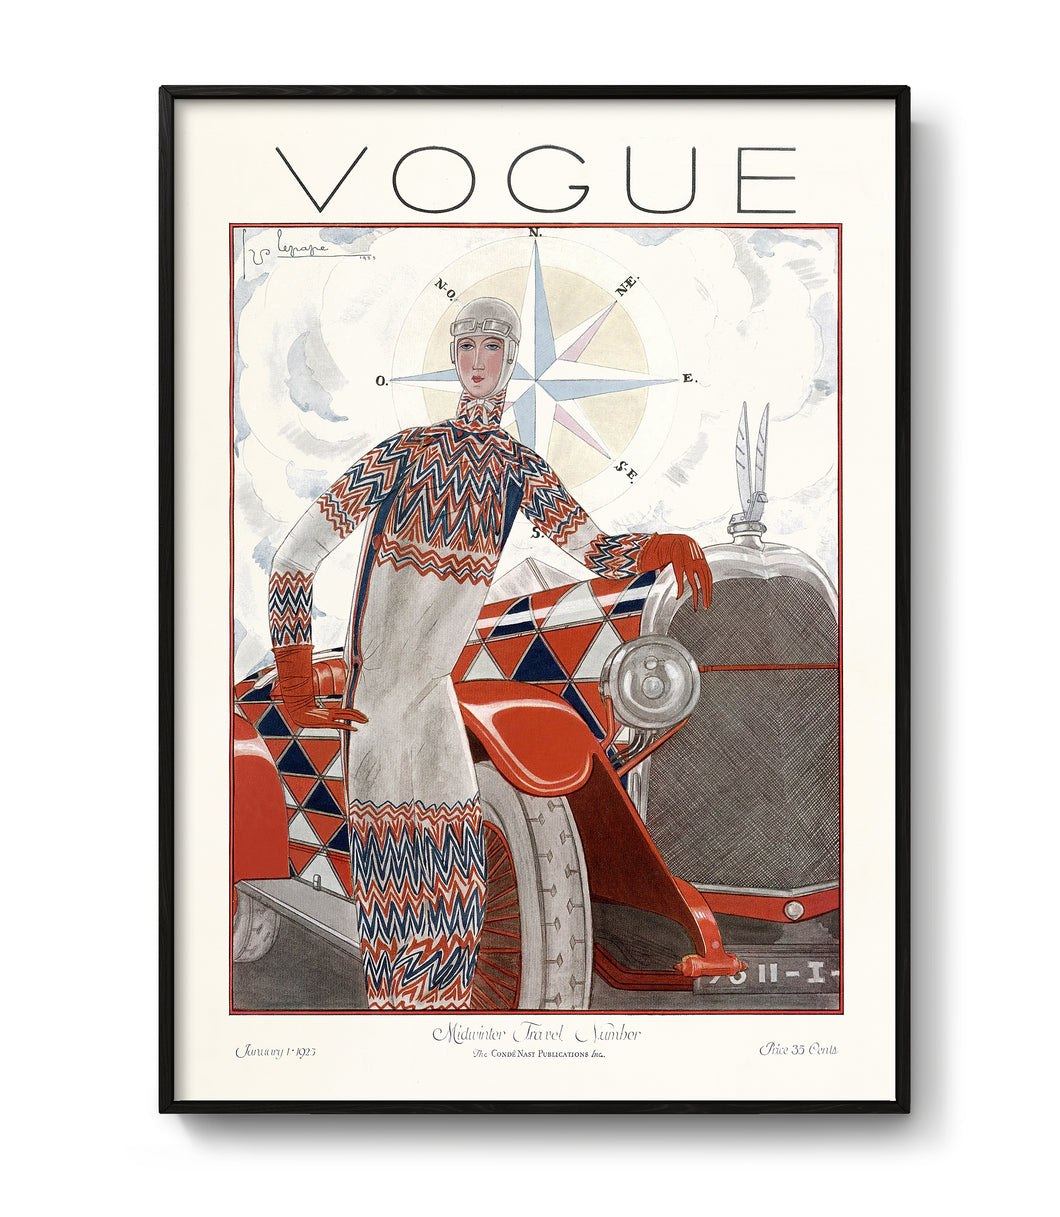 Vogue Cover by George Lepape